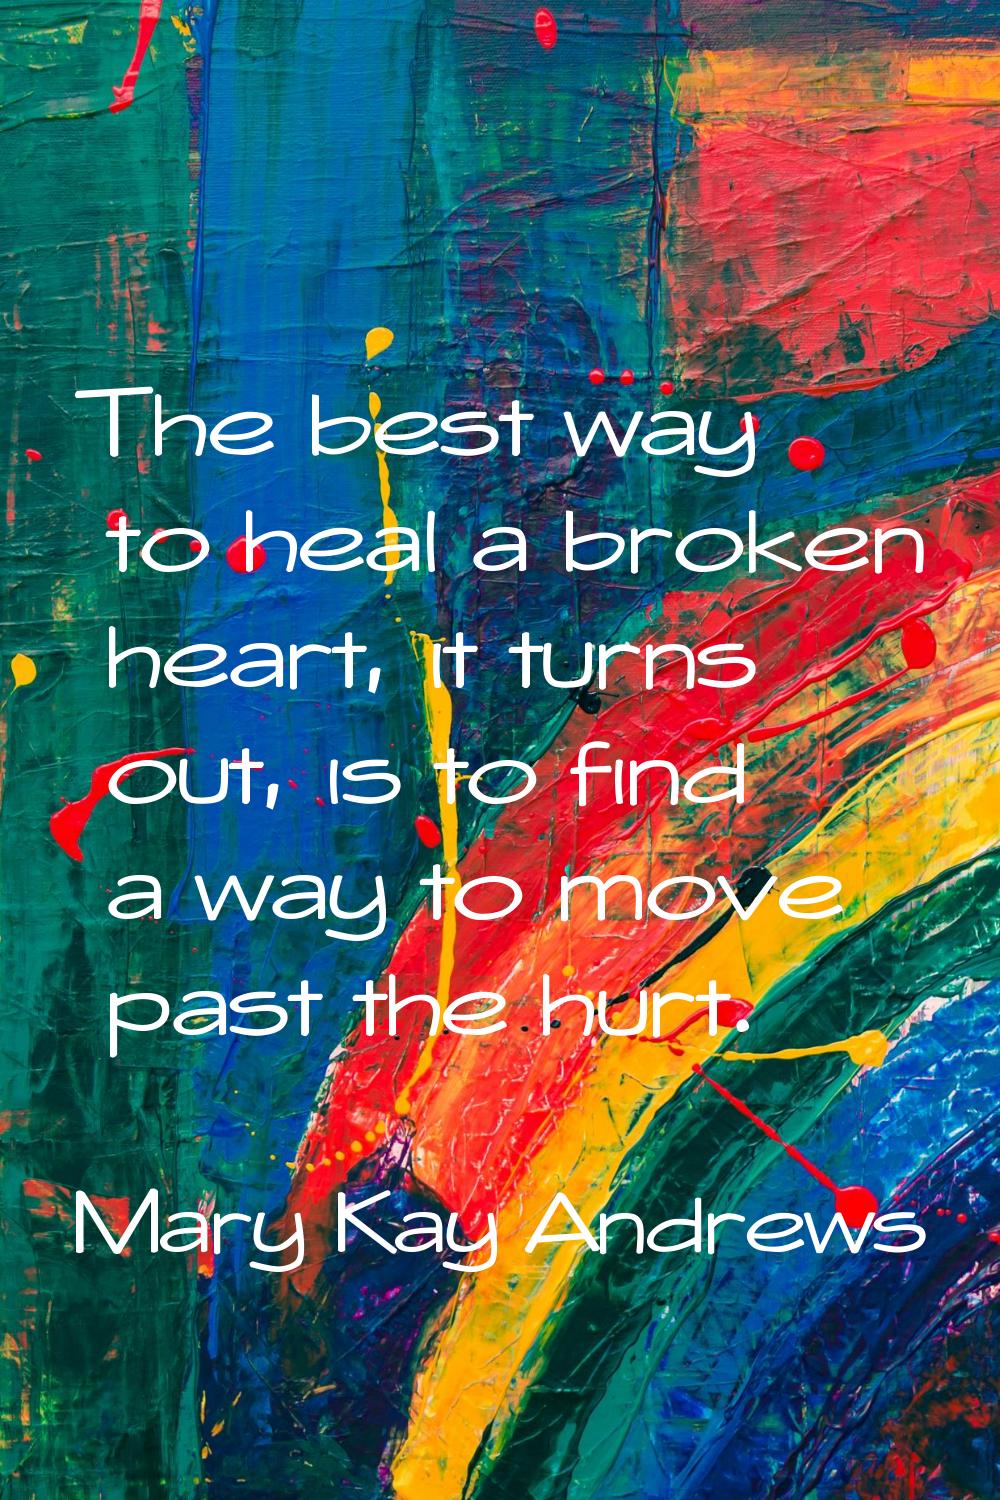 The best way to heal a broken heart, it turns out, is to find a way to move past the hurt.